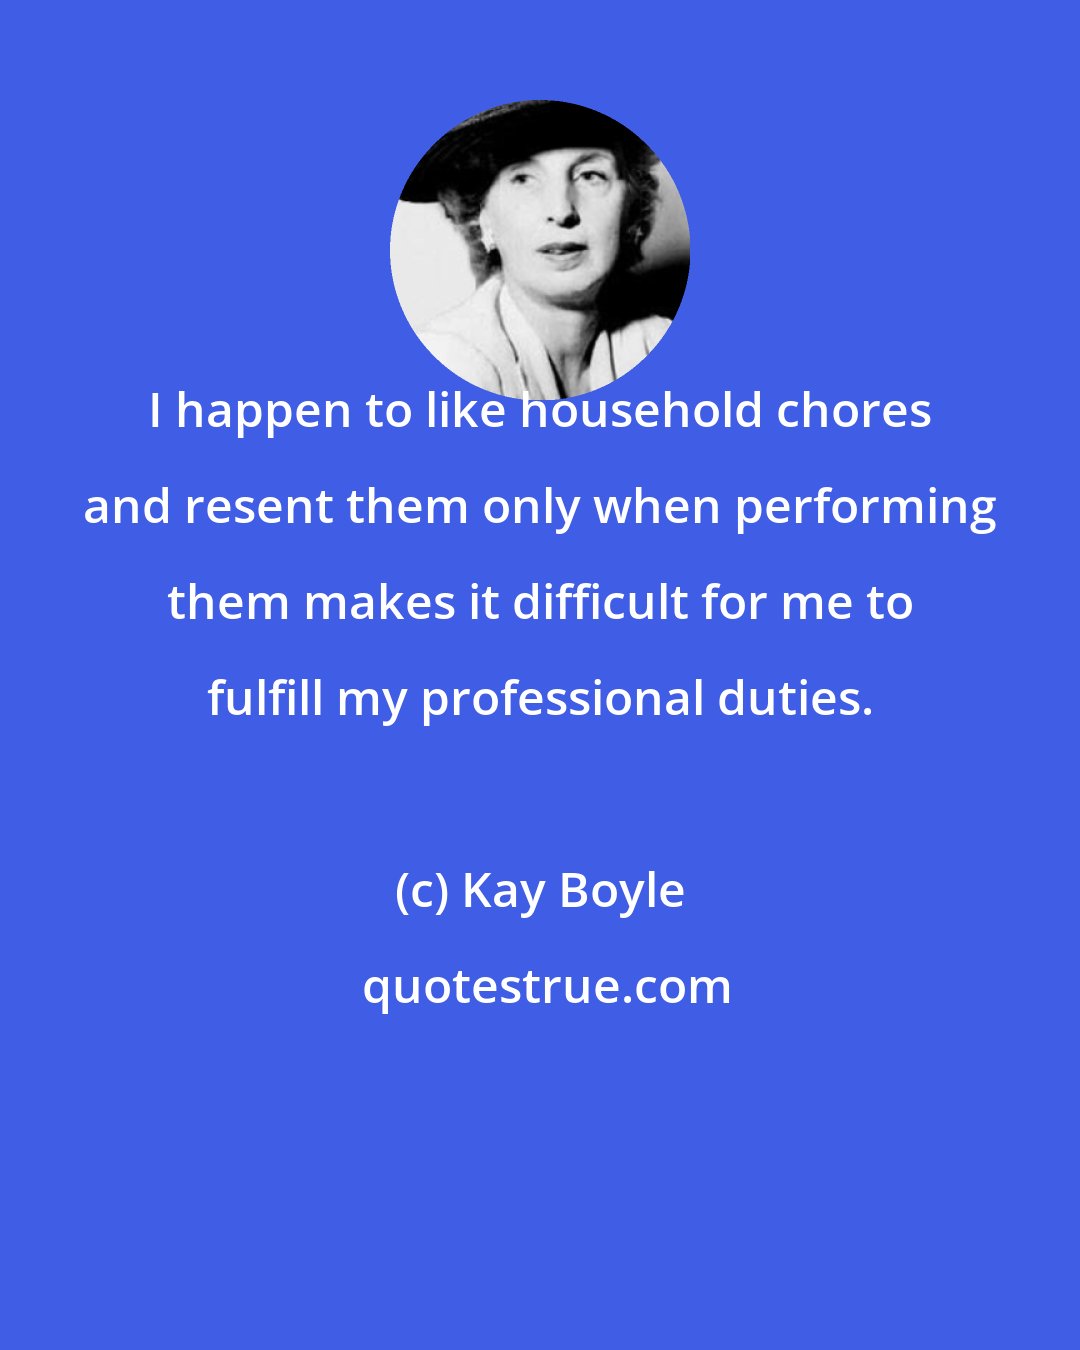 Kay Boyle: I happen to like household chores and resent them only when performing them makes it difficult for me to fulfill my professional duties.